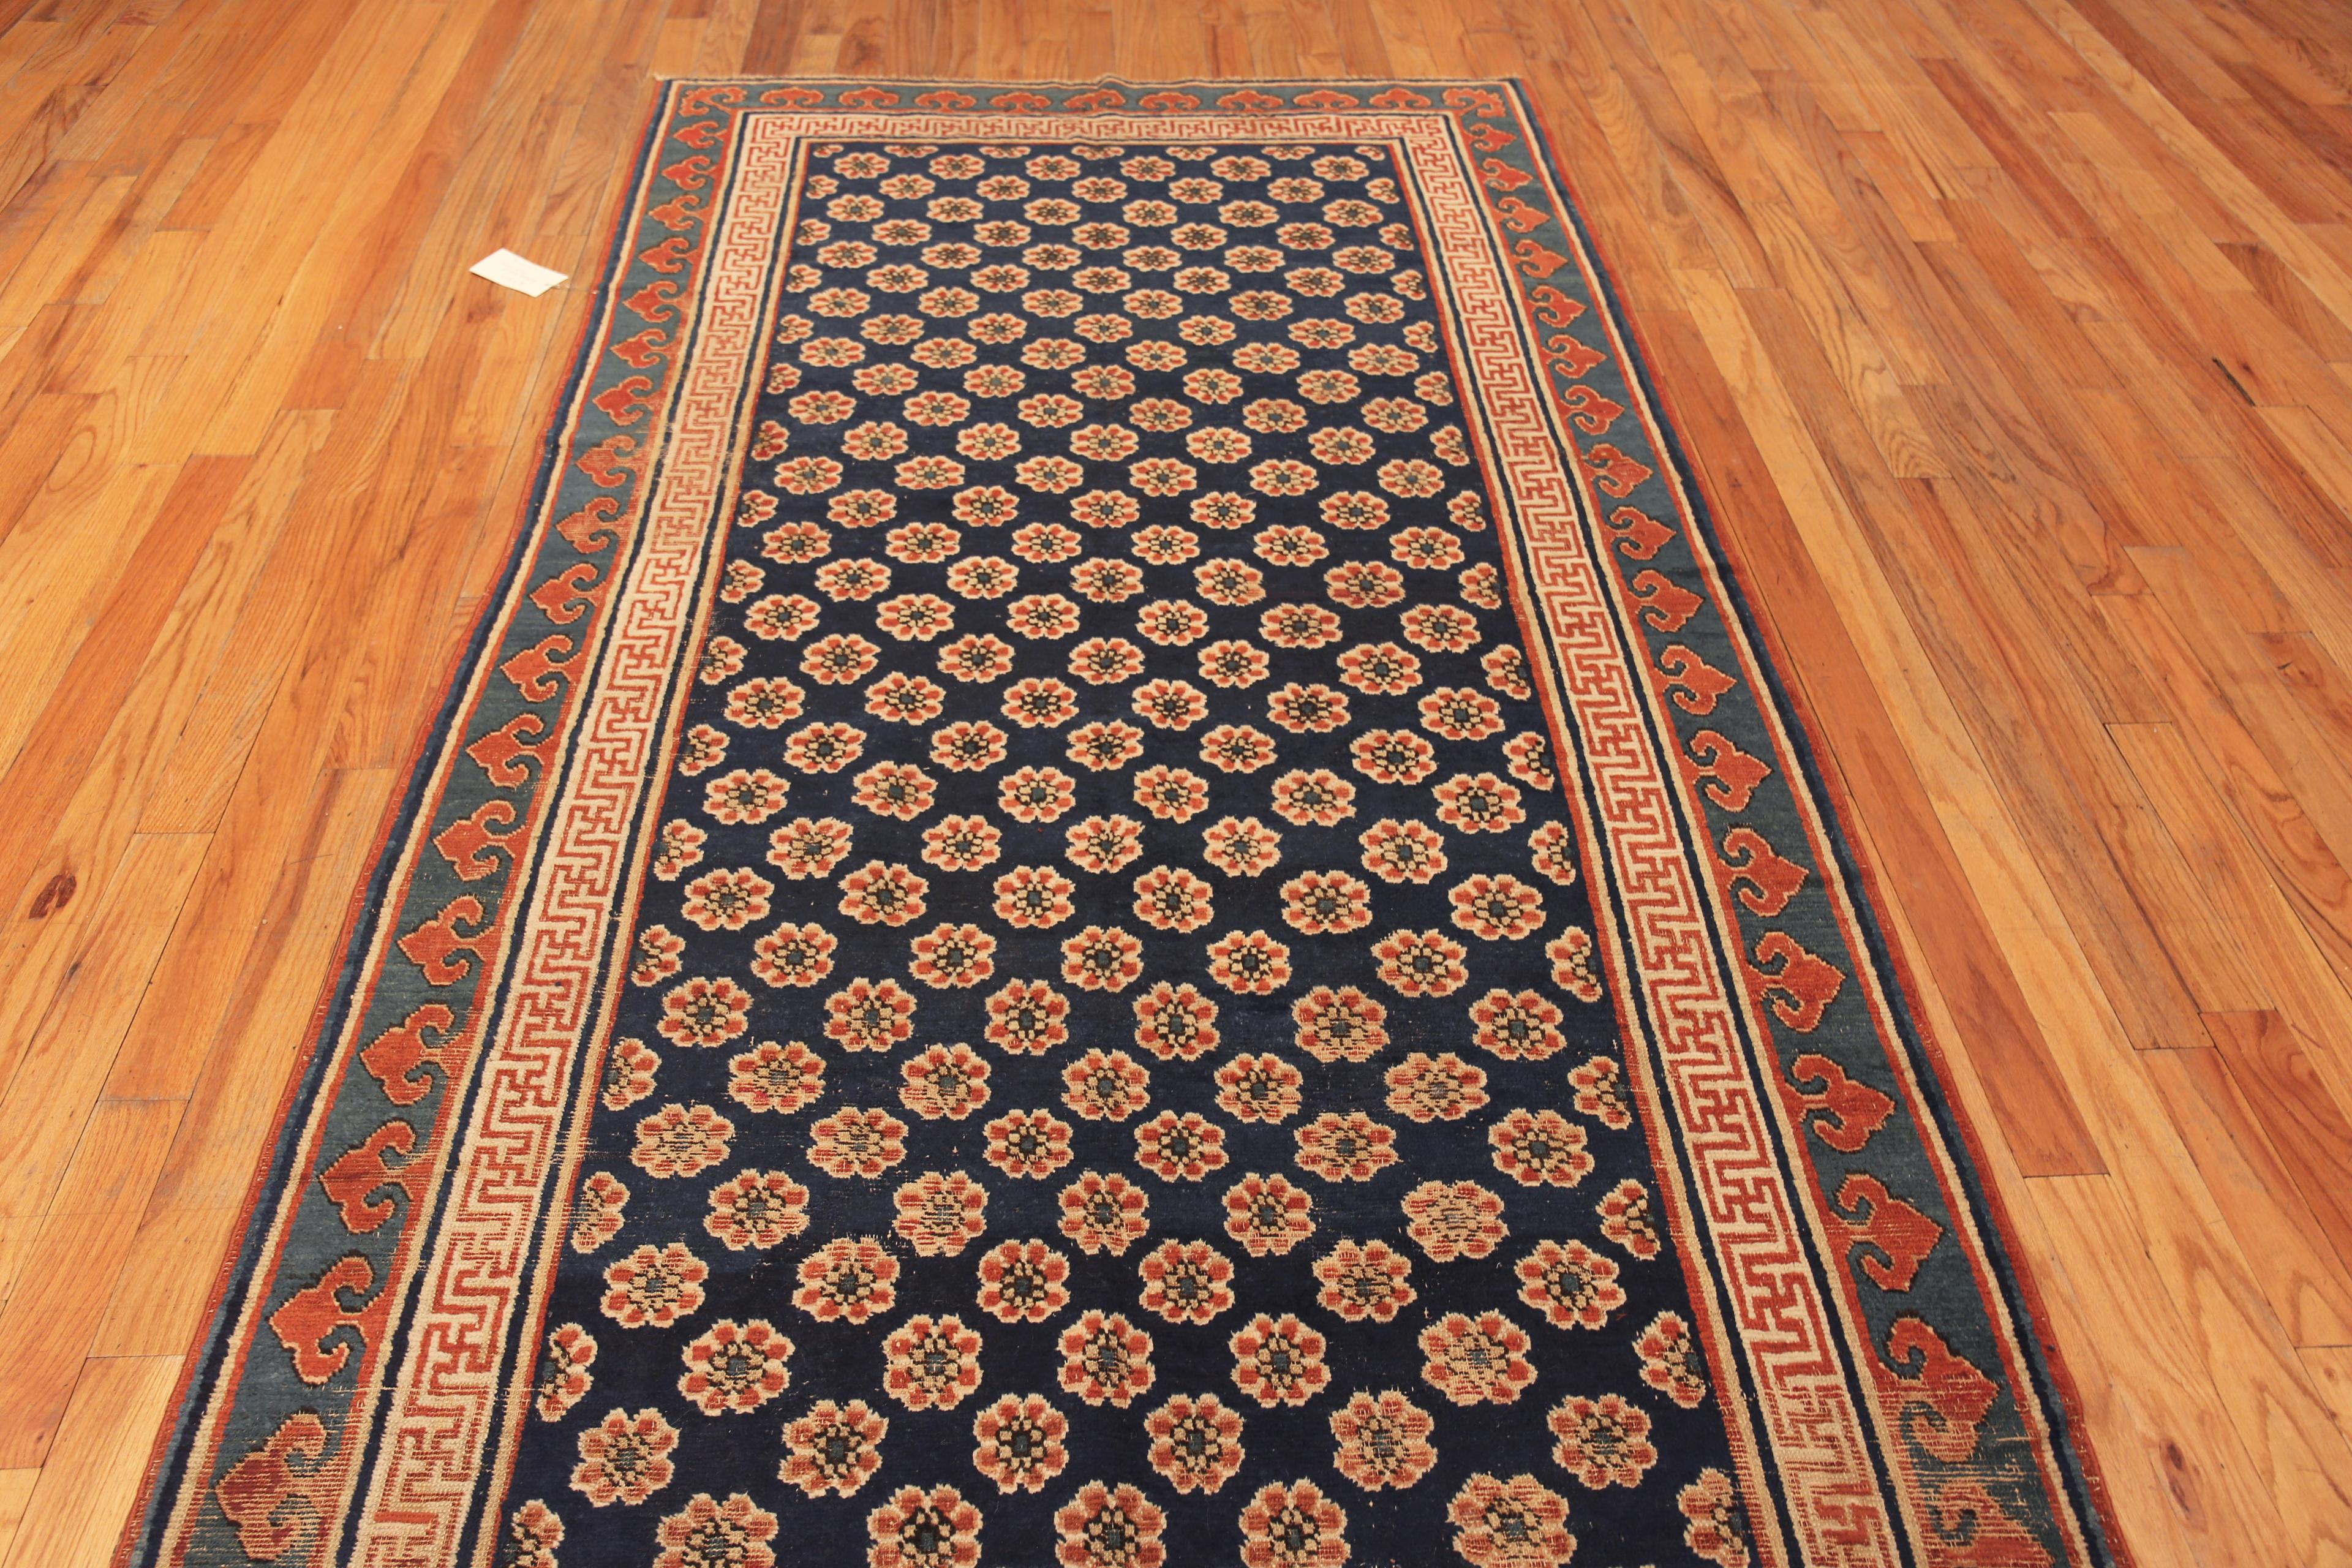 Beautiful Rare Antique 19th Century Chinese Kansu Hallway Runner Rug, Country of Origin: China, Circa date: Mid 19th Century. Size: 5 ft x 14 ft 2 in (1.52 m x 4.32 m)